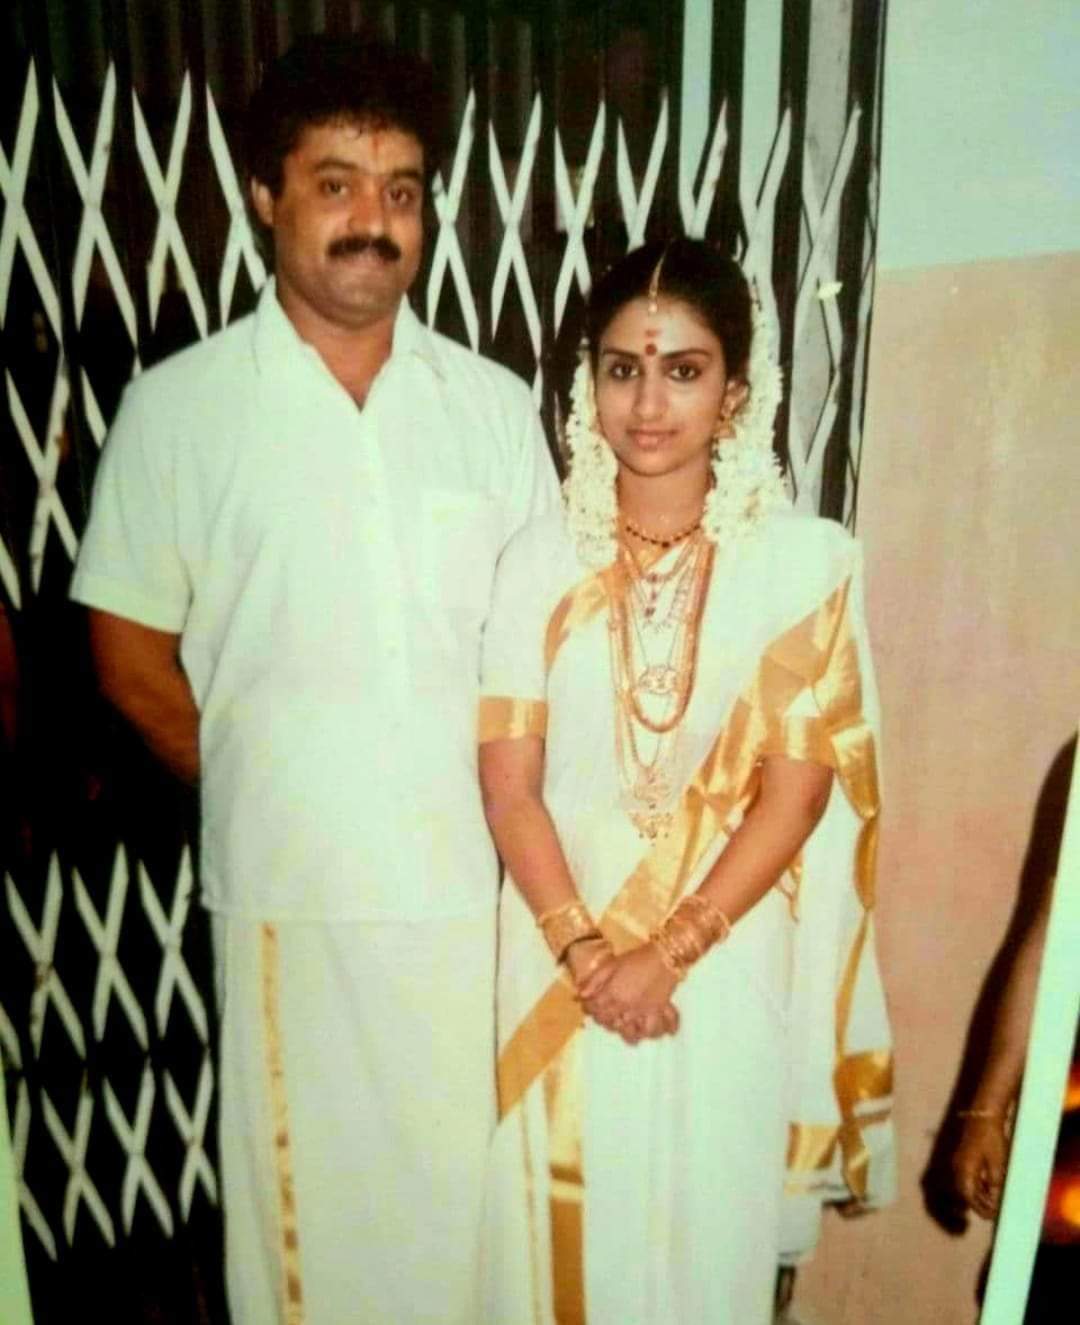 Suresh Gopi with his wife, Radhika Nair, during their marriage